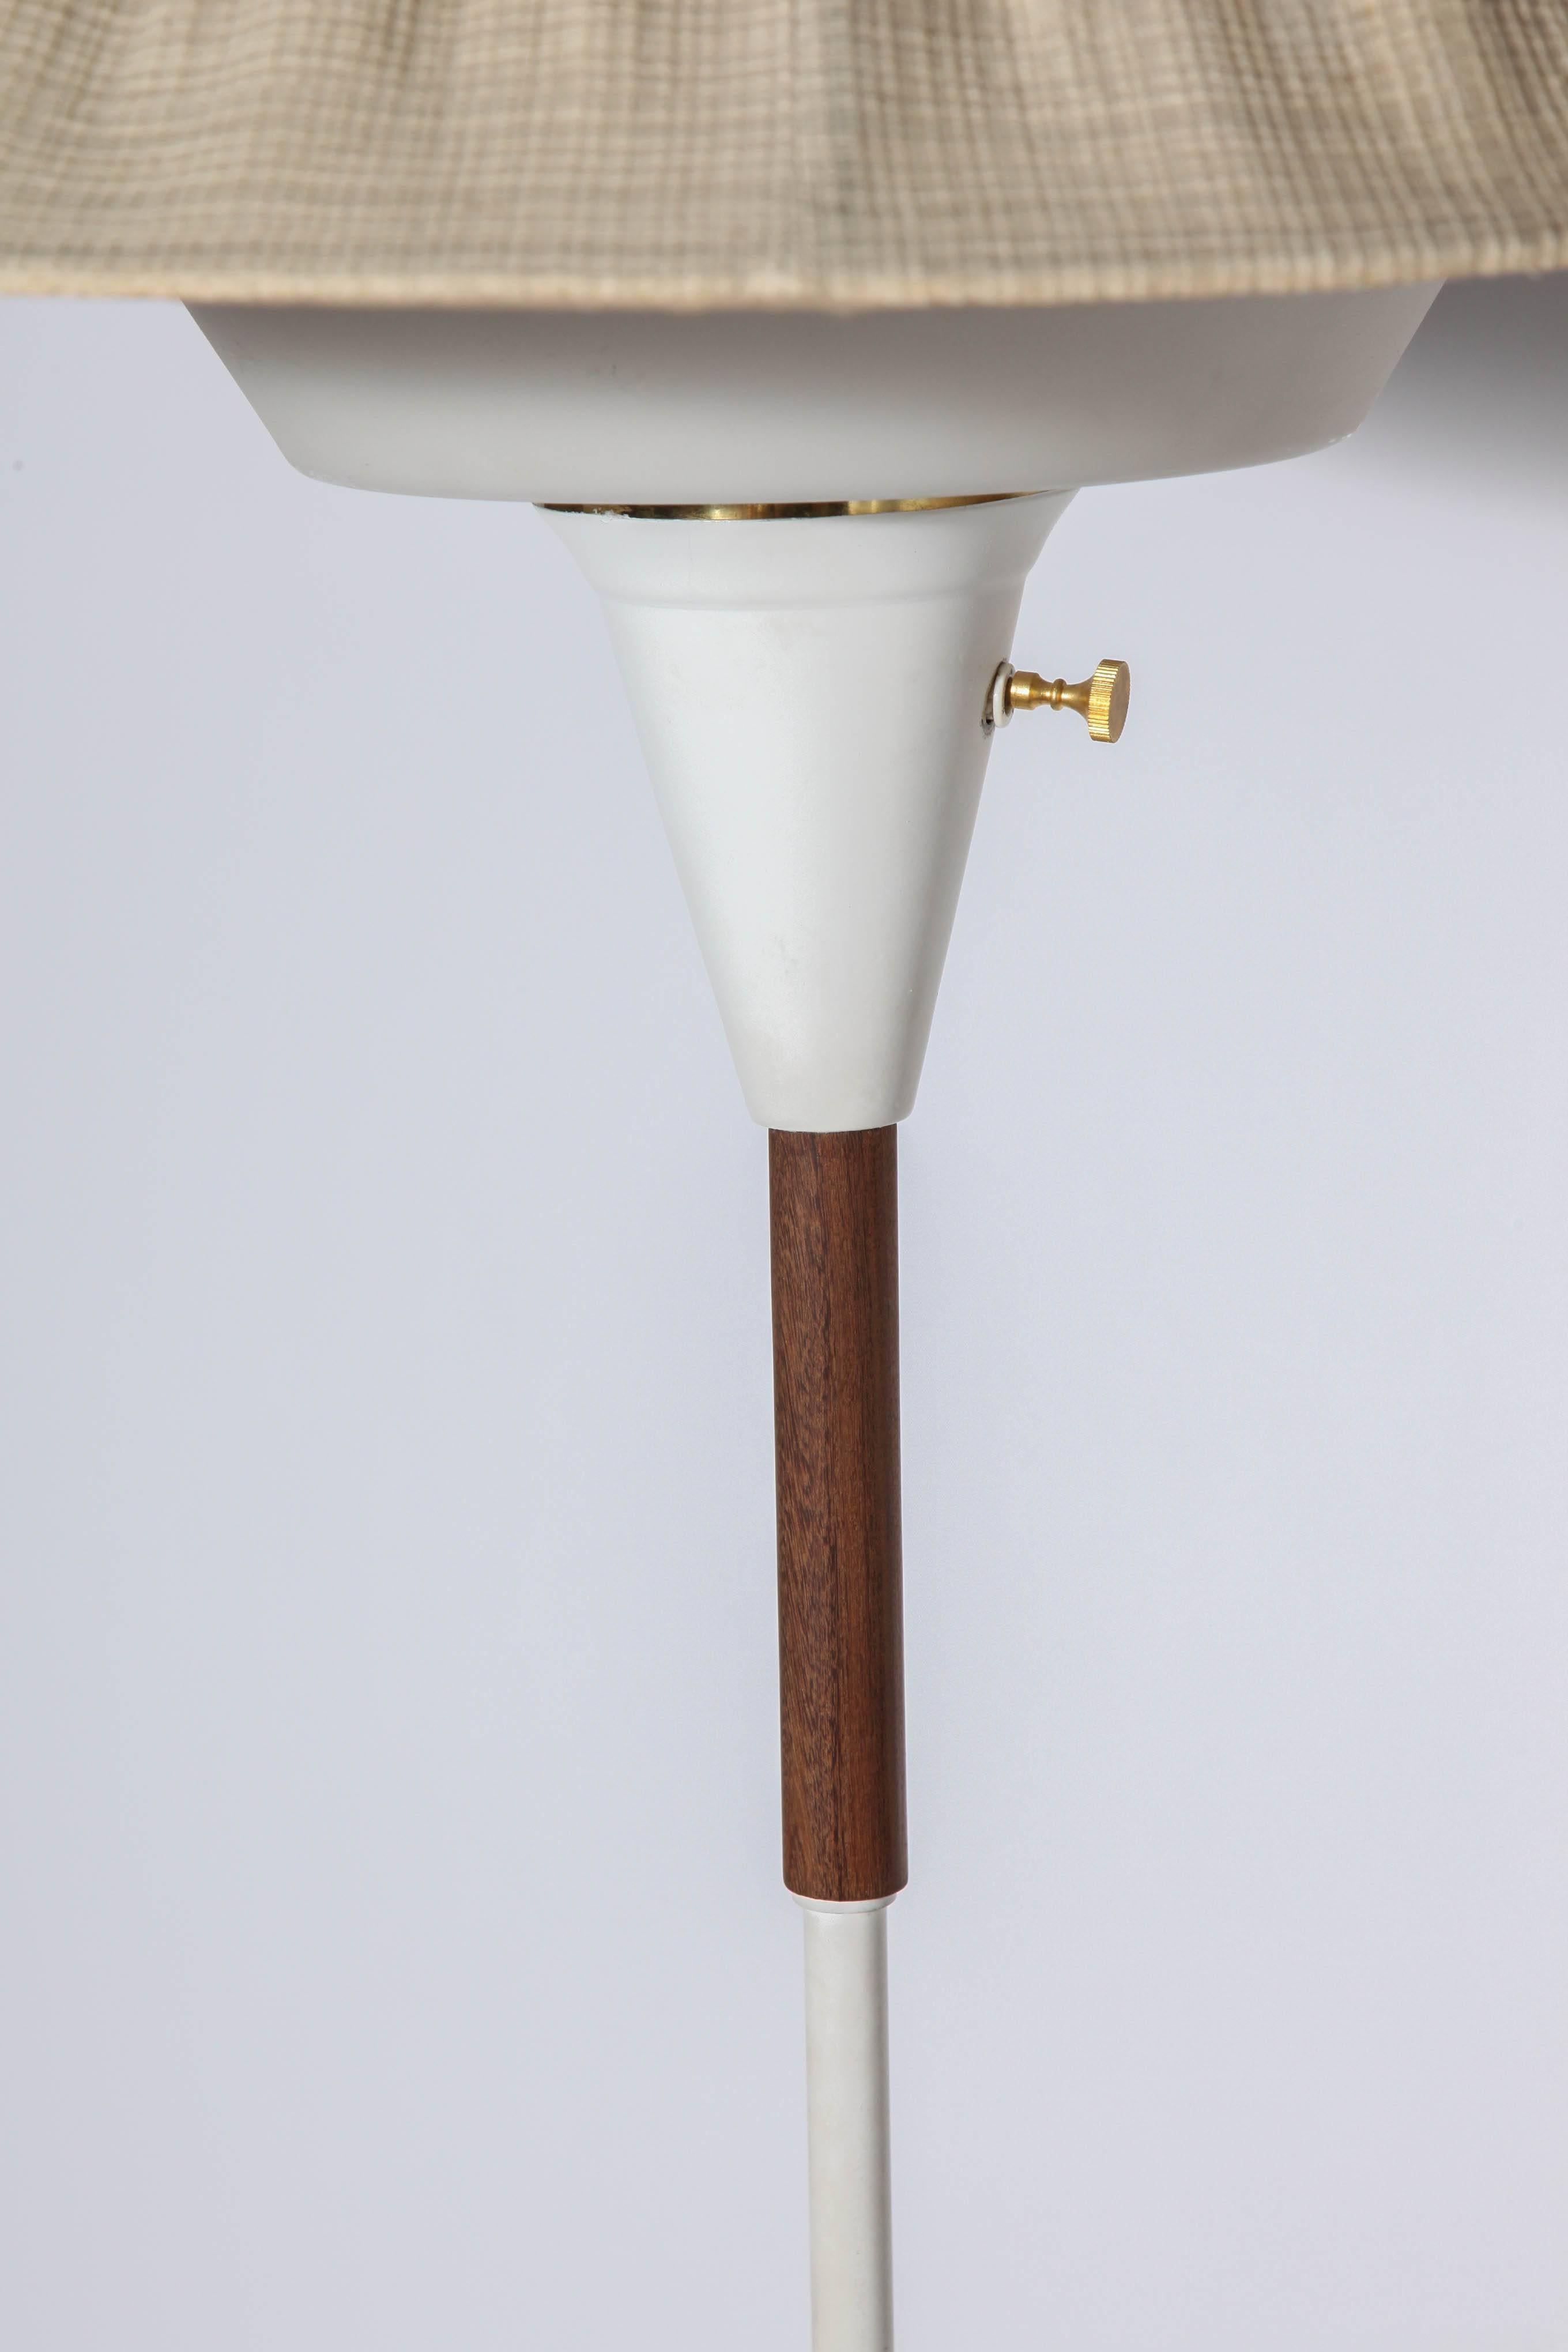 Tall Walnut & White Enamel Floor Lamp with Double Shades, 1950s  In Good Condition For Sale In Bainbridge, NY